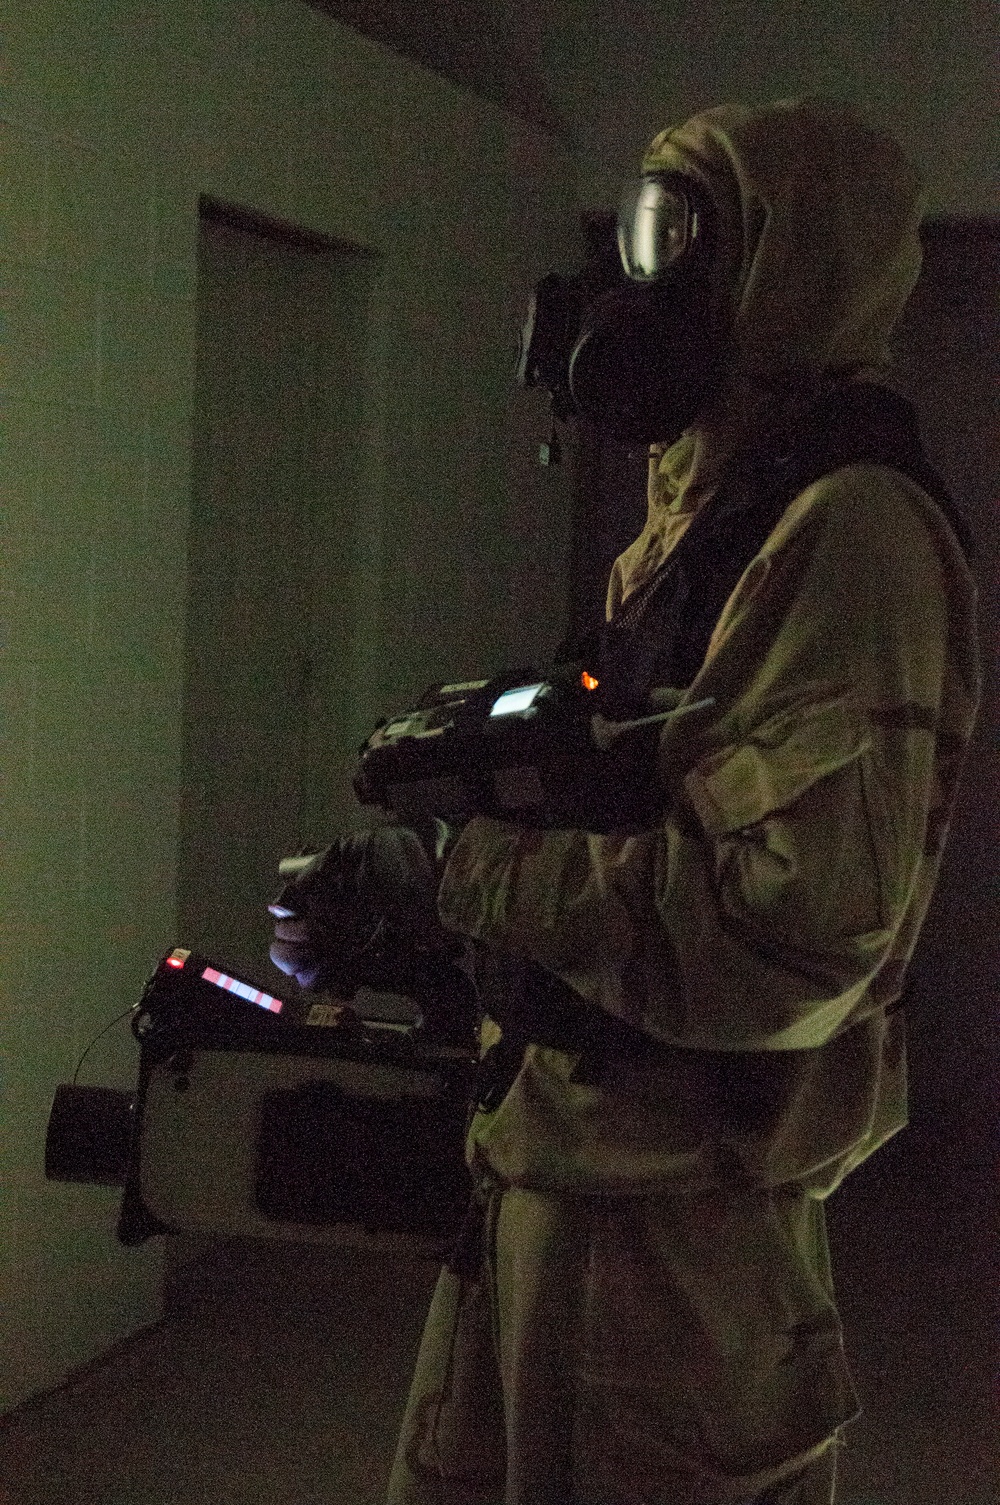 11th Civil Support Team trains with radioactive material